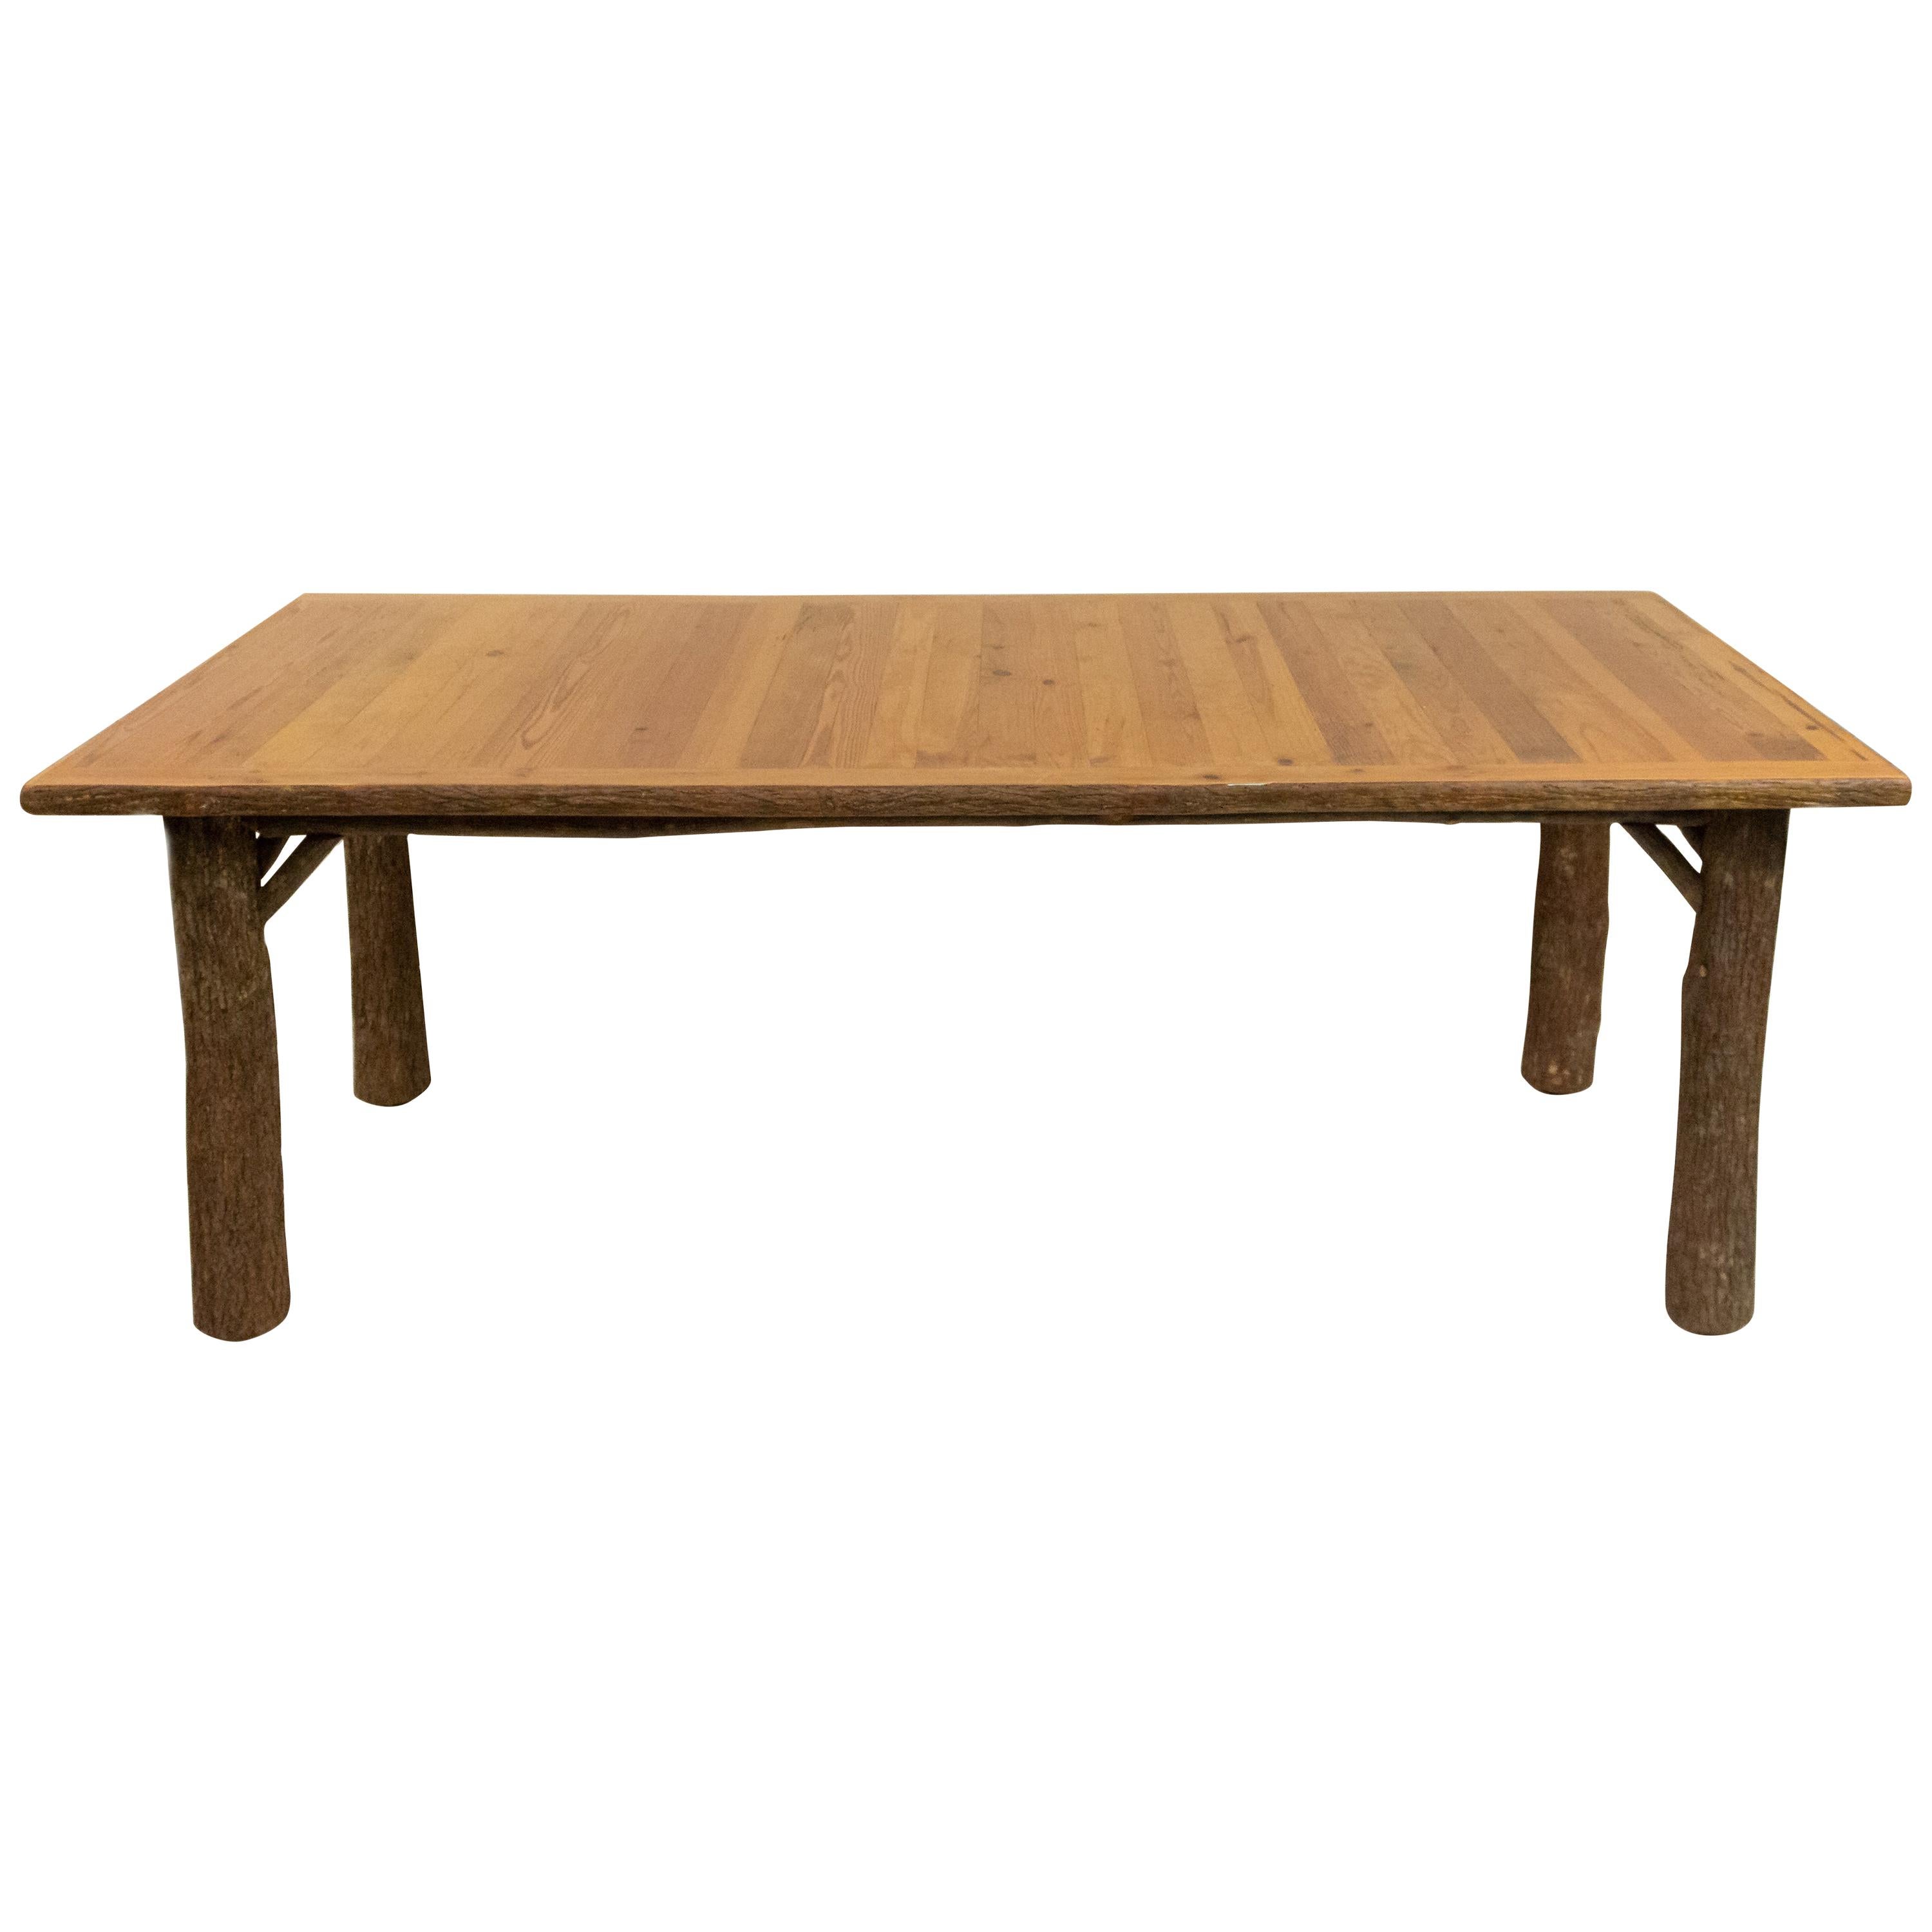 Rustic Old Hickory Dining Table with Bark Legs For Sale